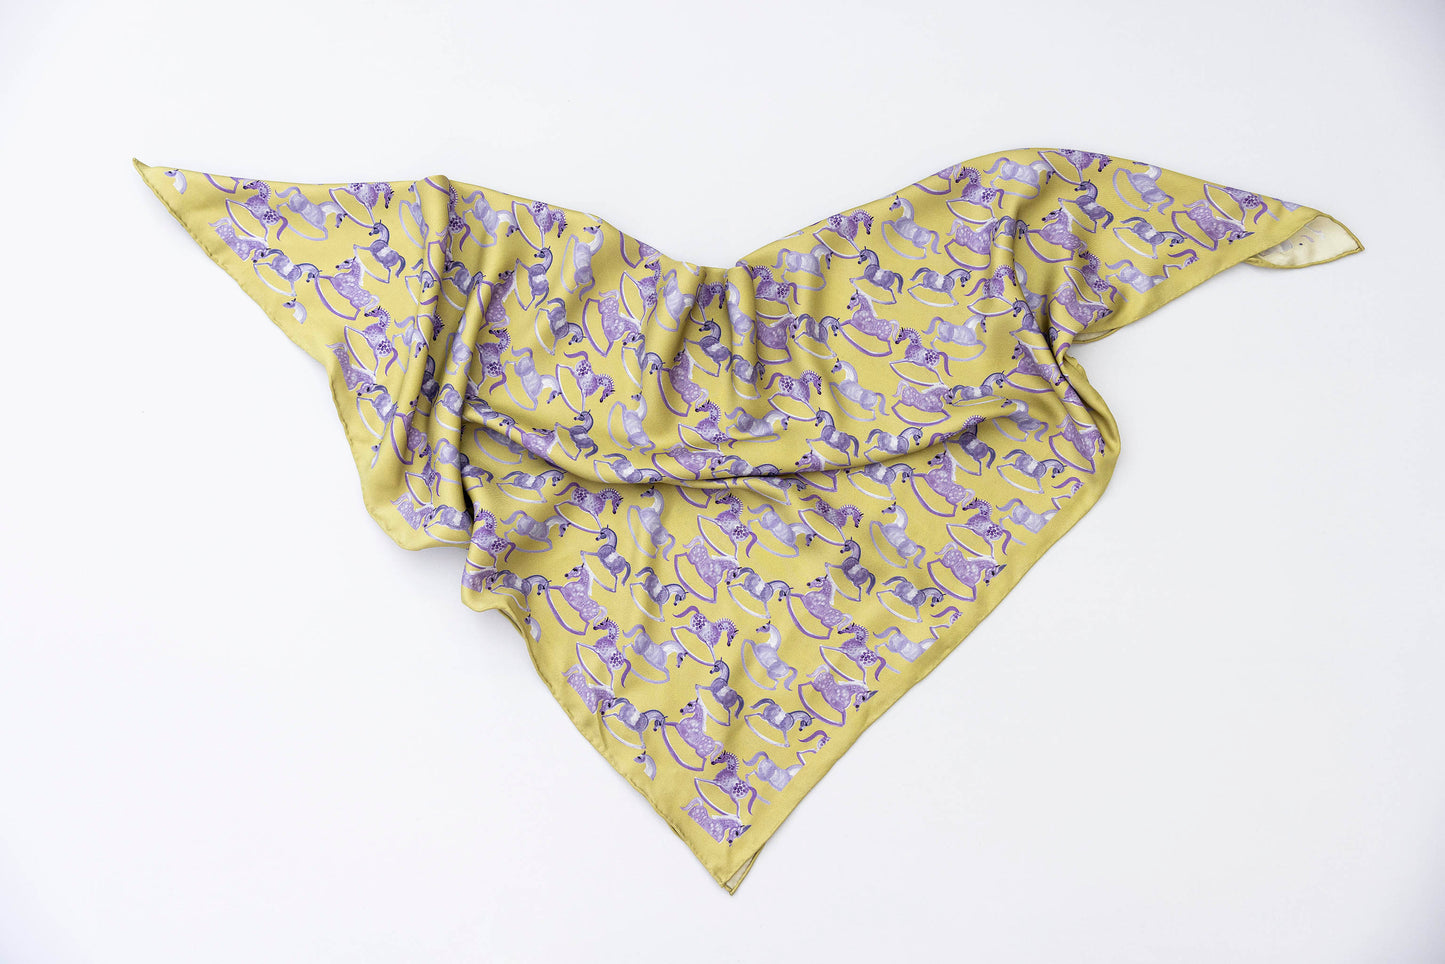 Stampede Twill Scarf - Lilac on Mustard